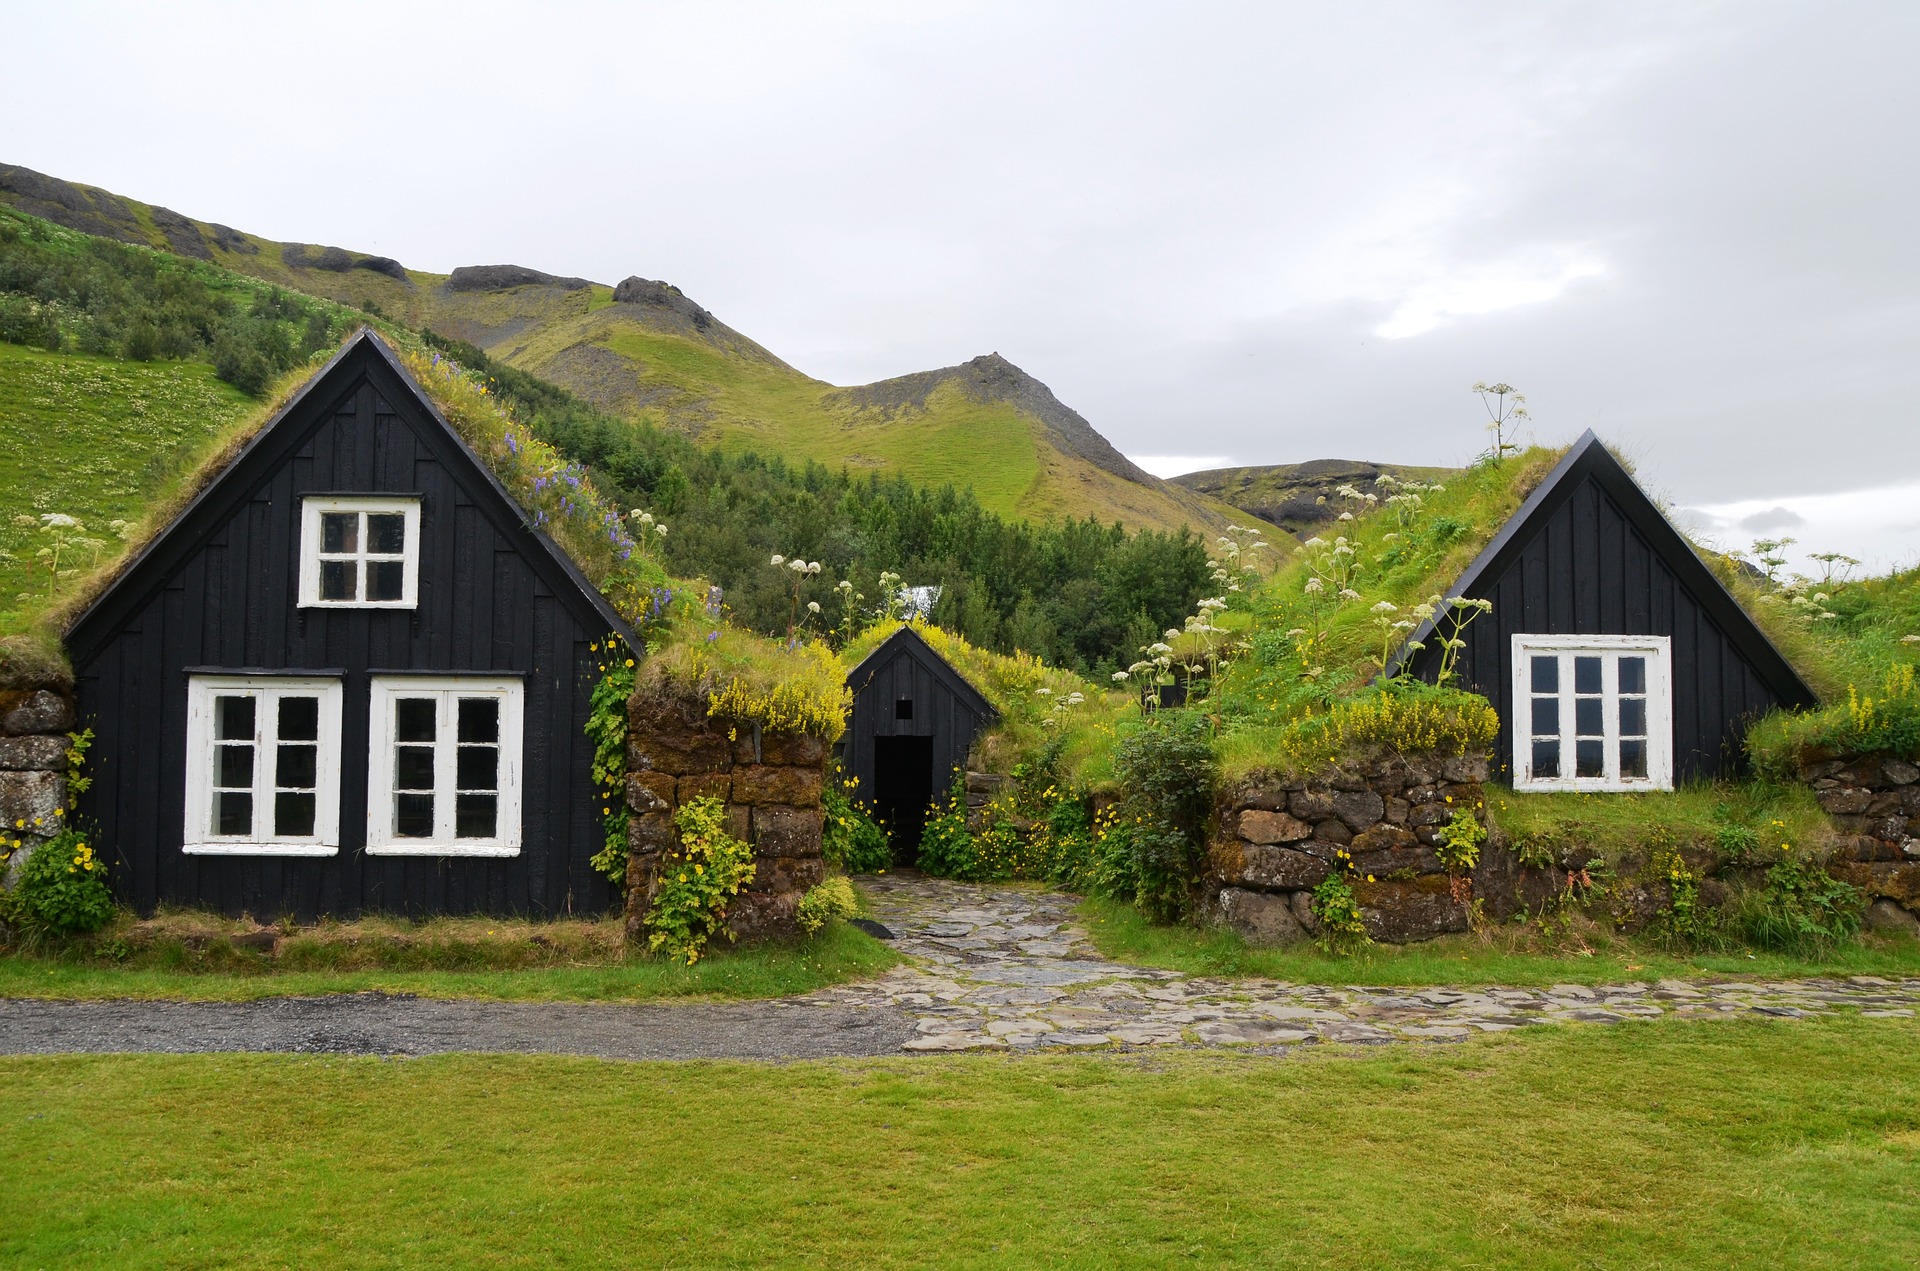 icelandic traditional houses with green grass rooftops, white windows, grass, clouds